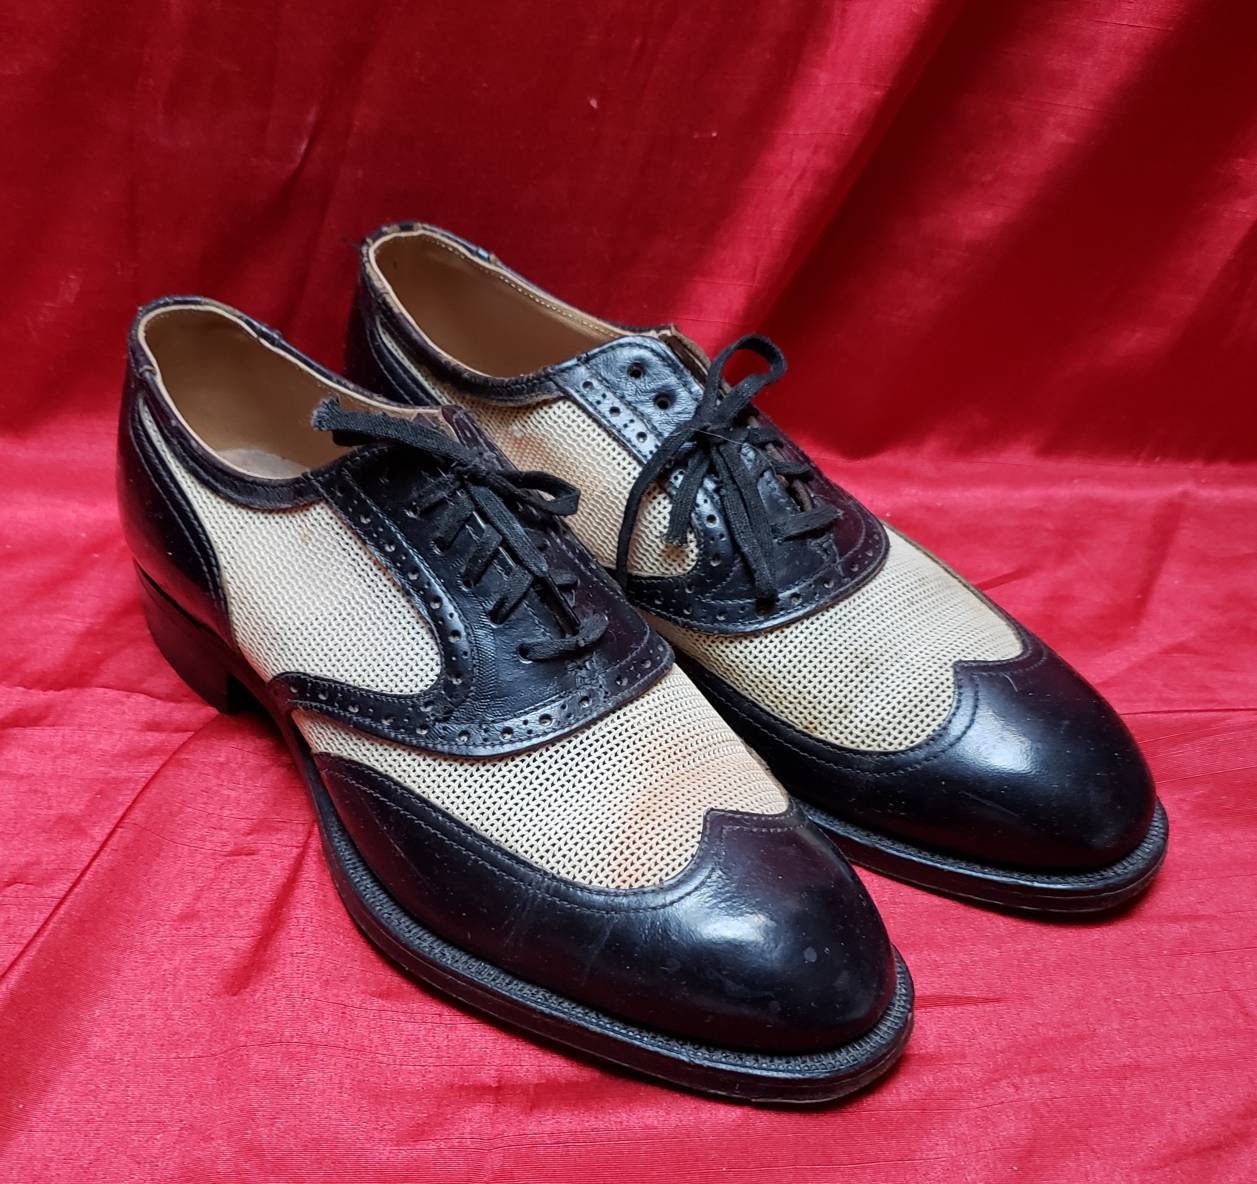 Vintage 1950s Black and White Wingtip Shoes and Red Pumps